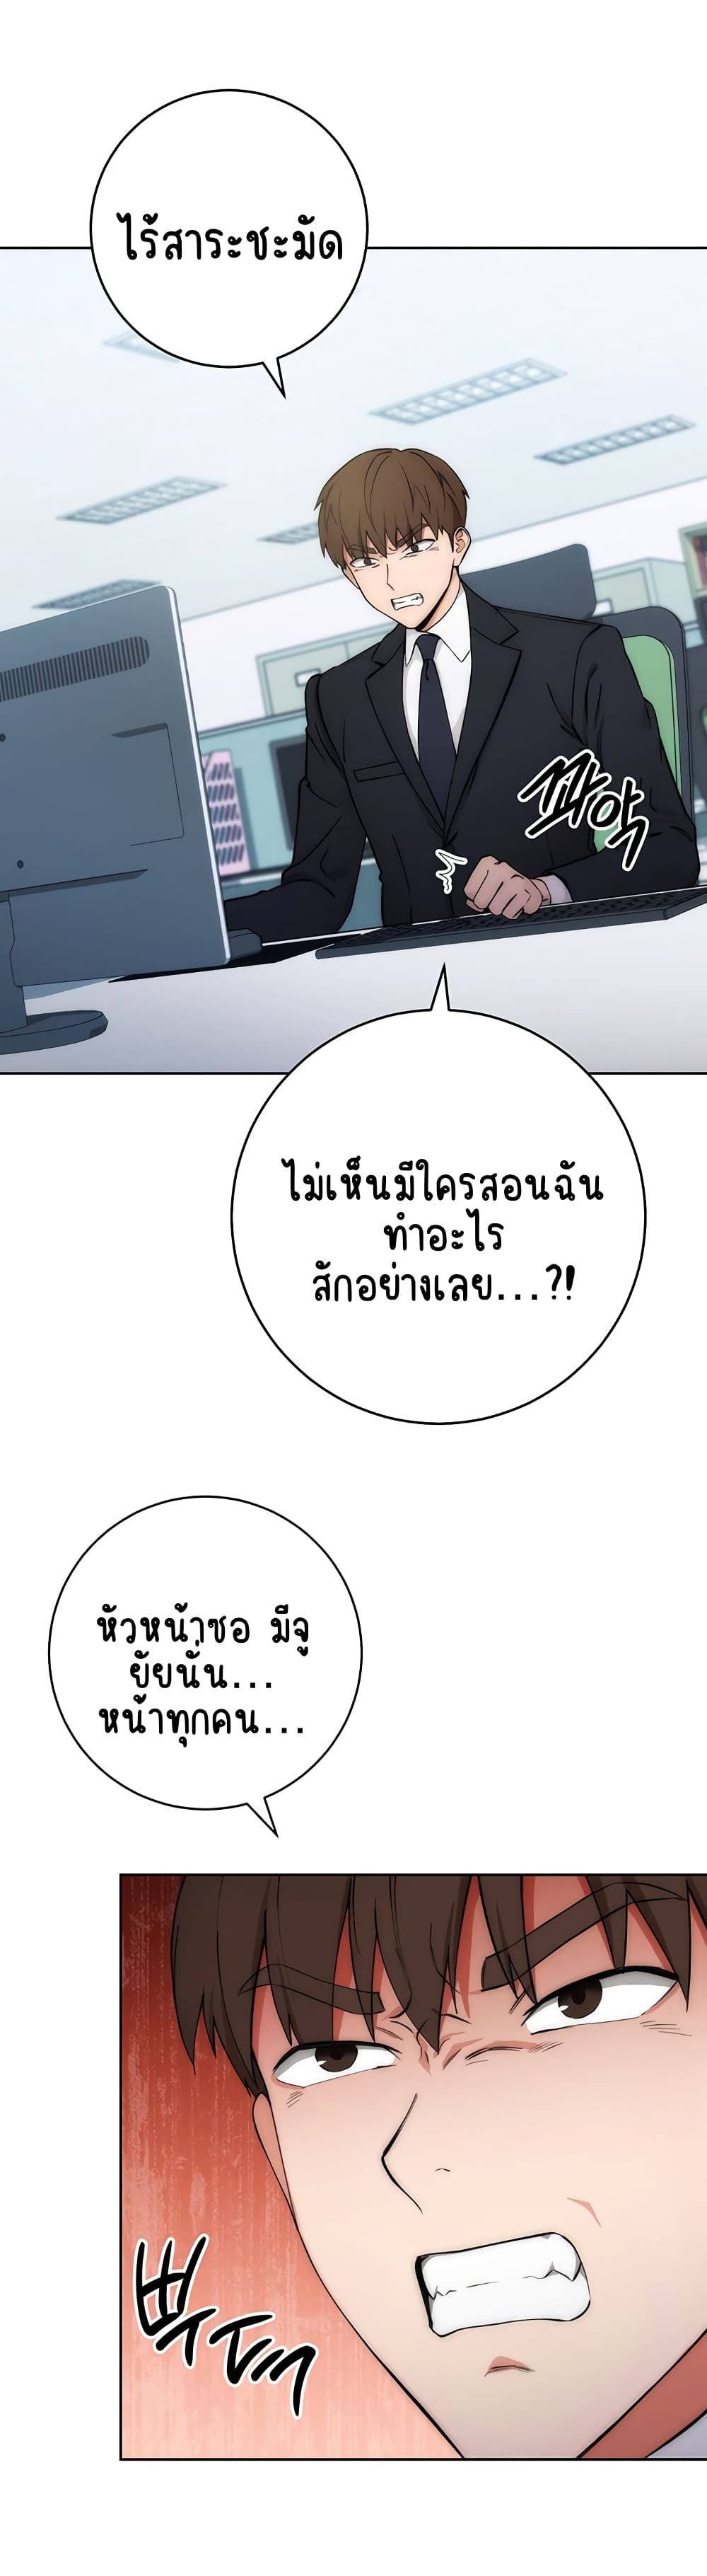 Outsider: The Invisible Man ตอนที่ 1 ภาพ 37